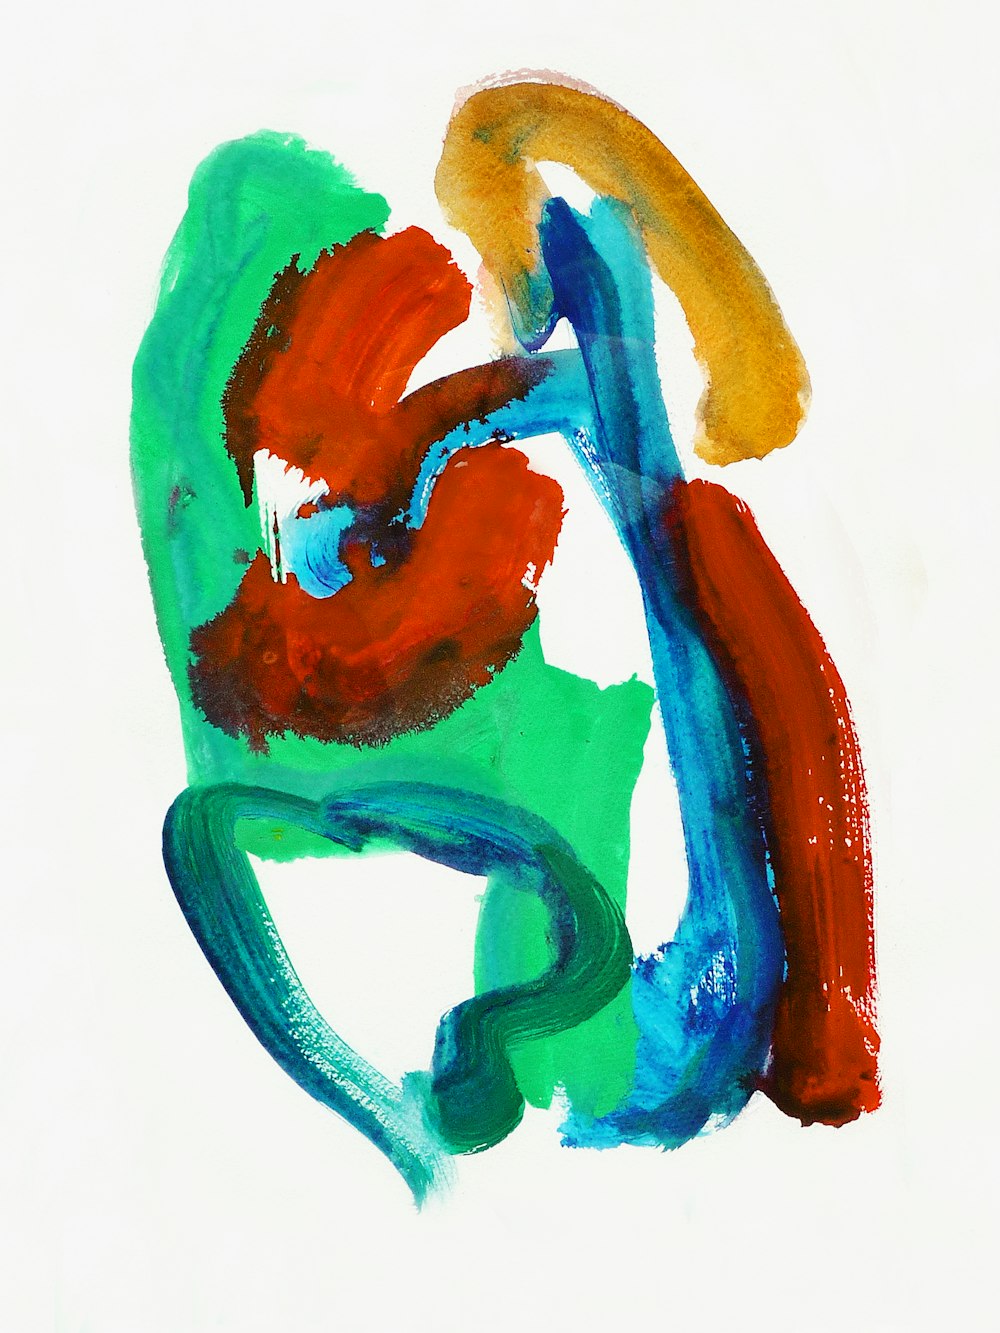 a painting of a red, blue, and green figure